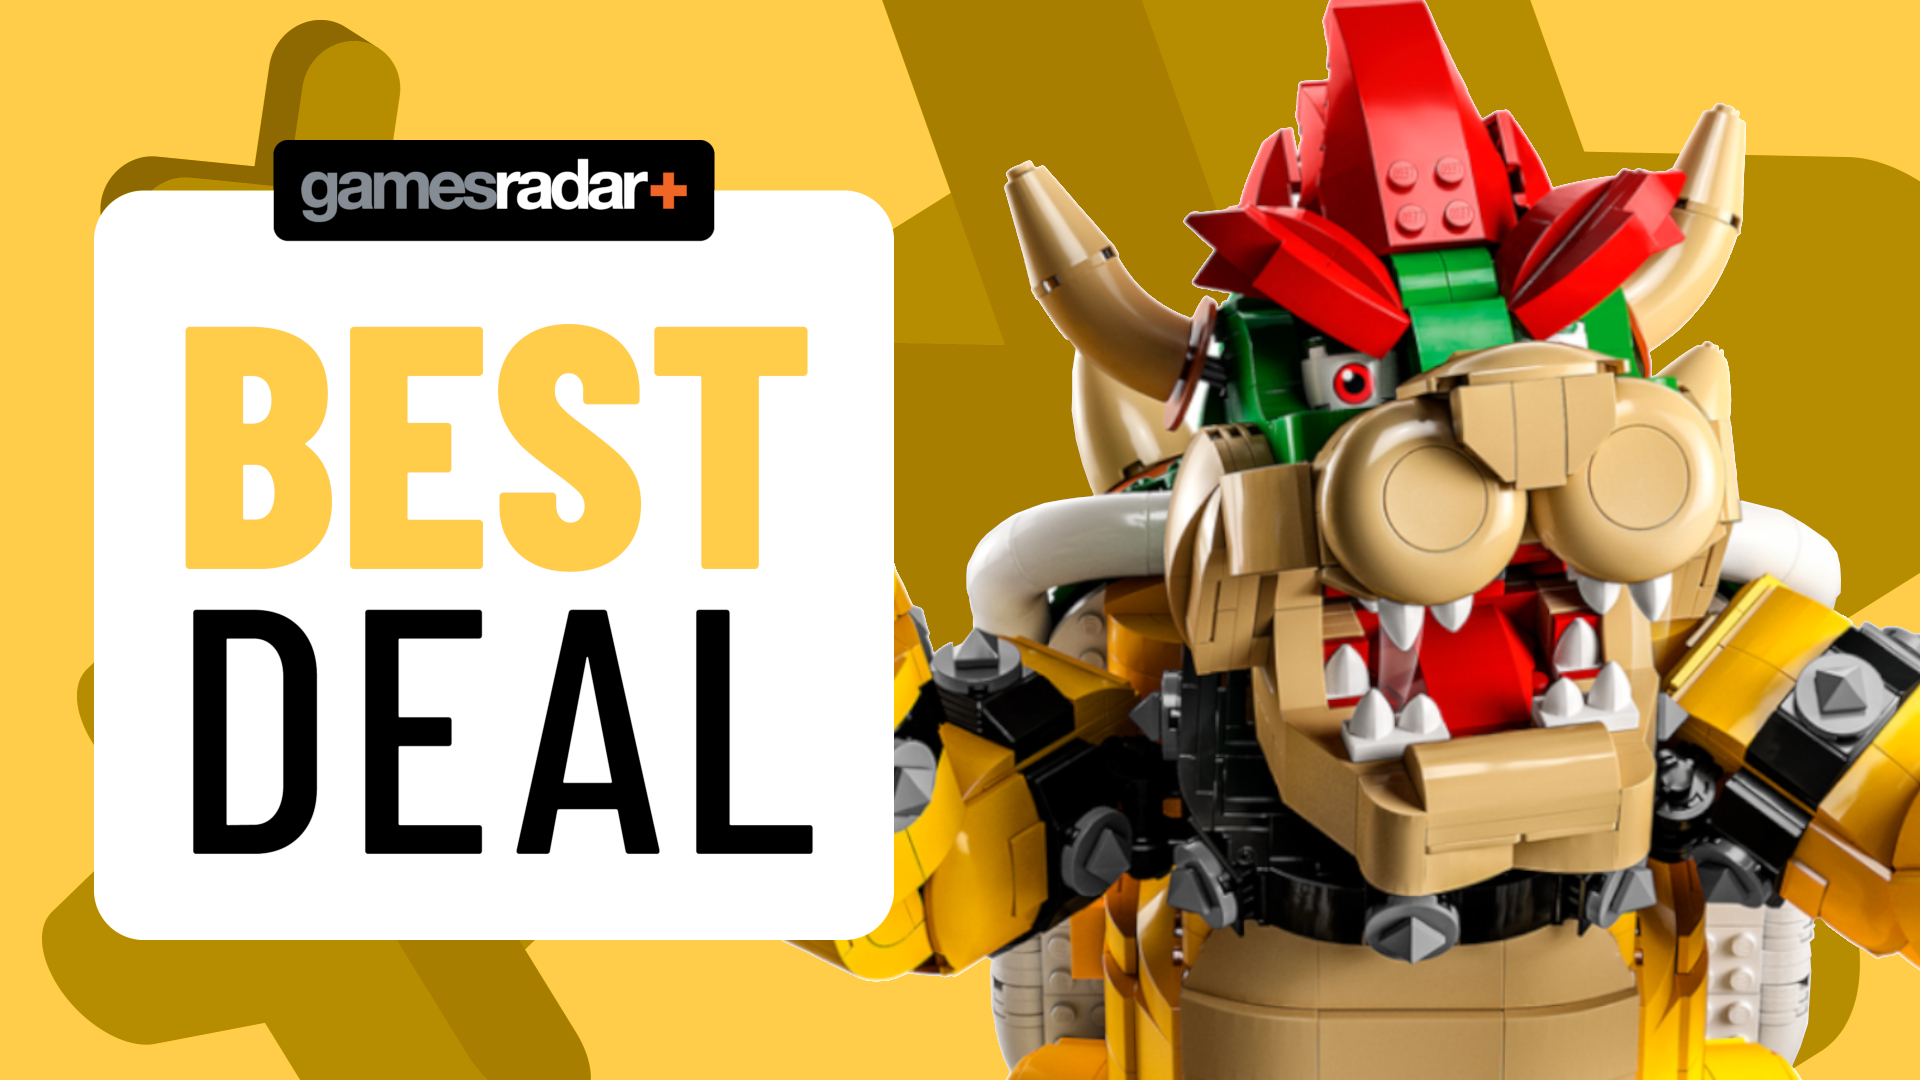 Lego Mighty Bowser hits lowest price in months